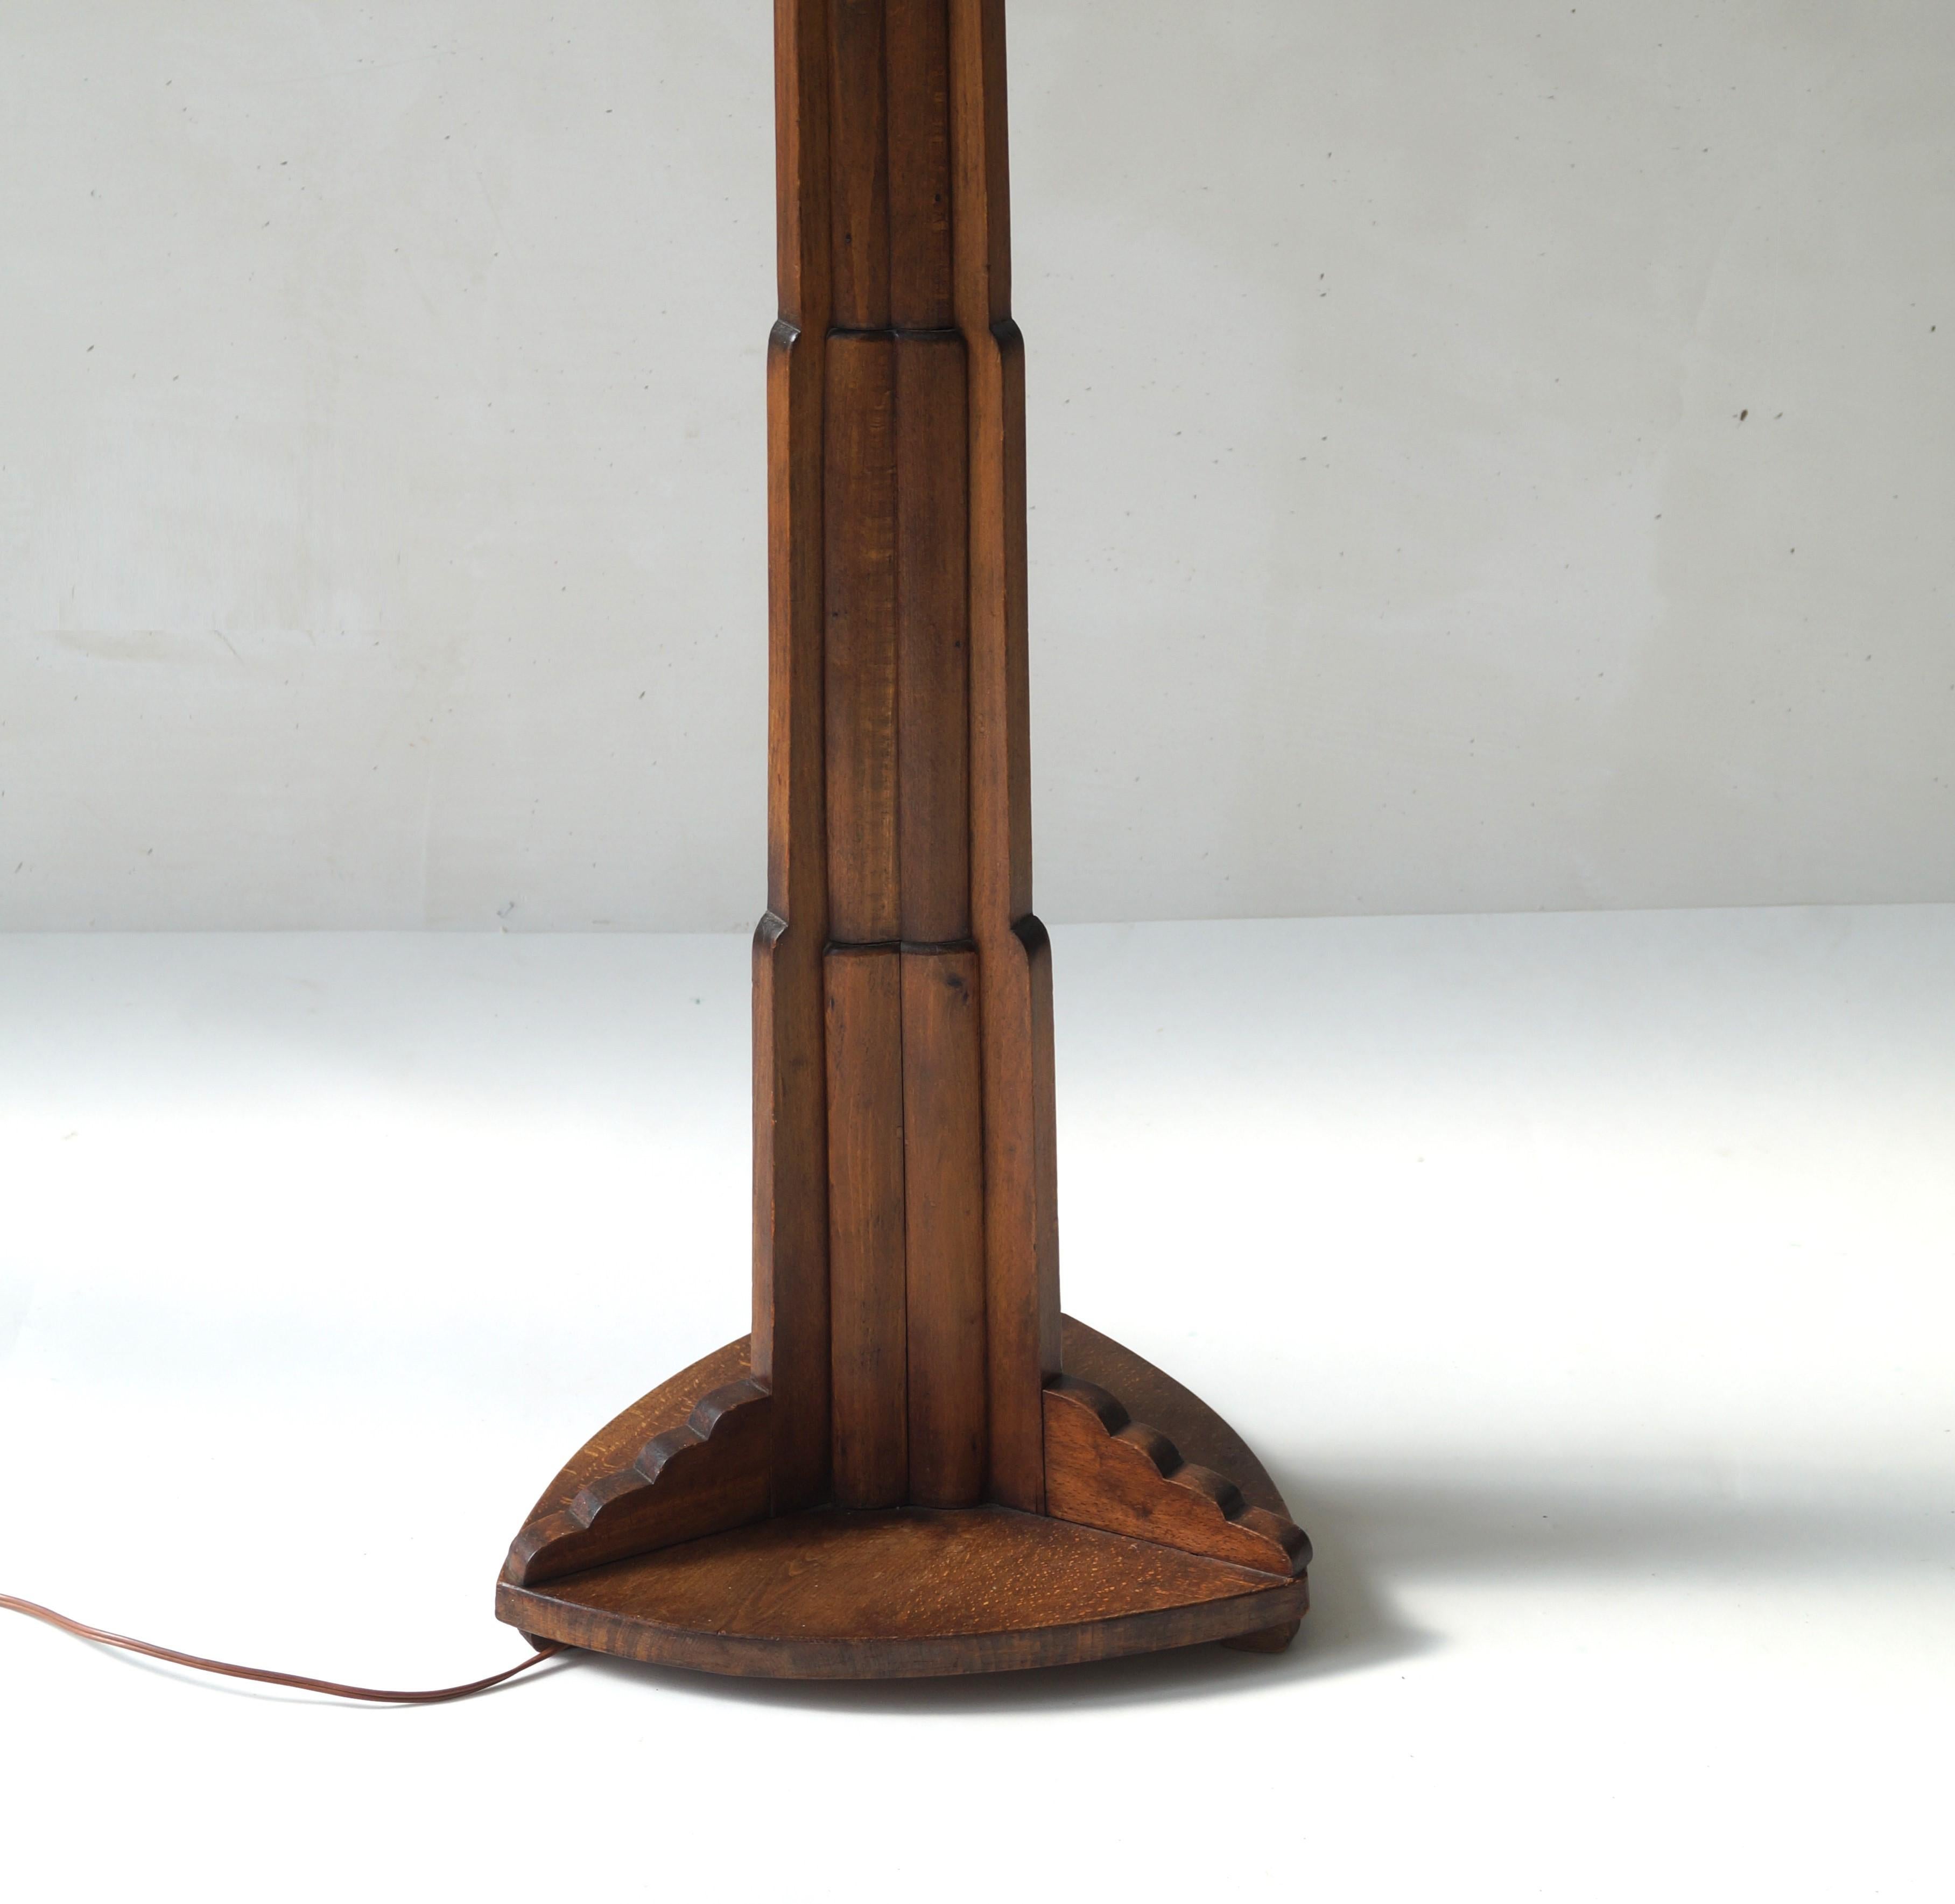 A scuptural Dutch Art Deco 1920s floorlamp, Amsterdam School . Made from solid oak, with an extraordinary shaft and base. The piece is in very good original condition. 
This floorlamp combines very well with other Amsterdam School items or an eye